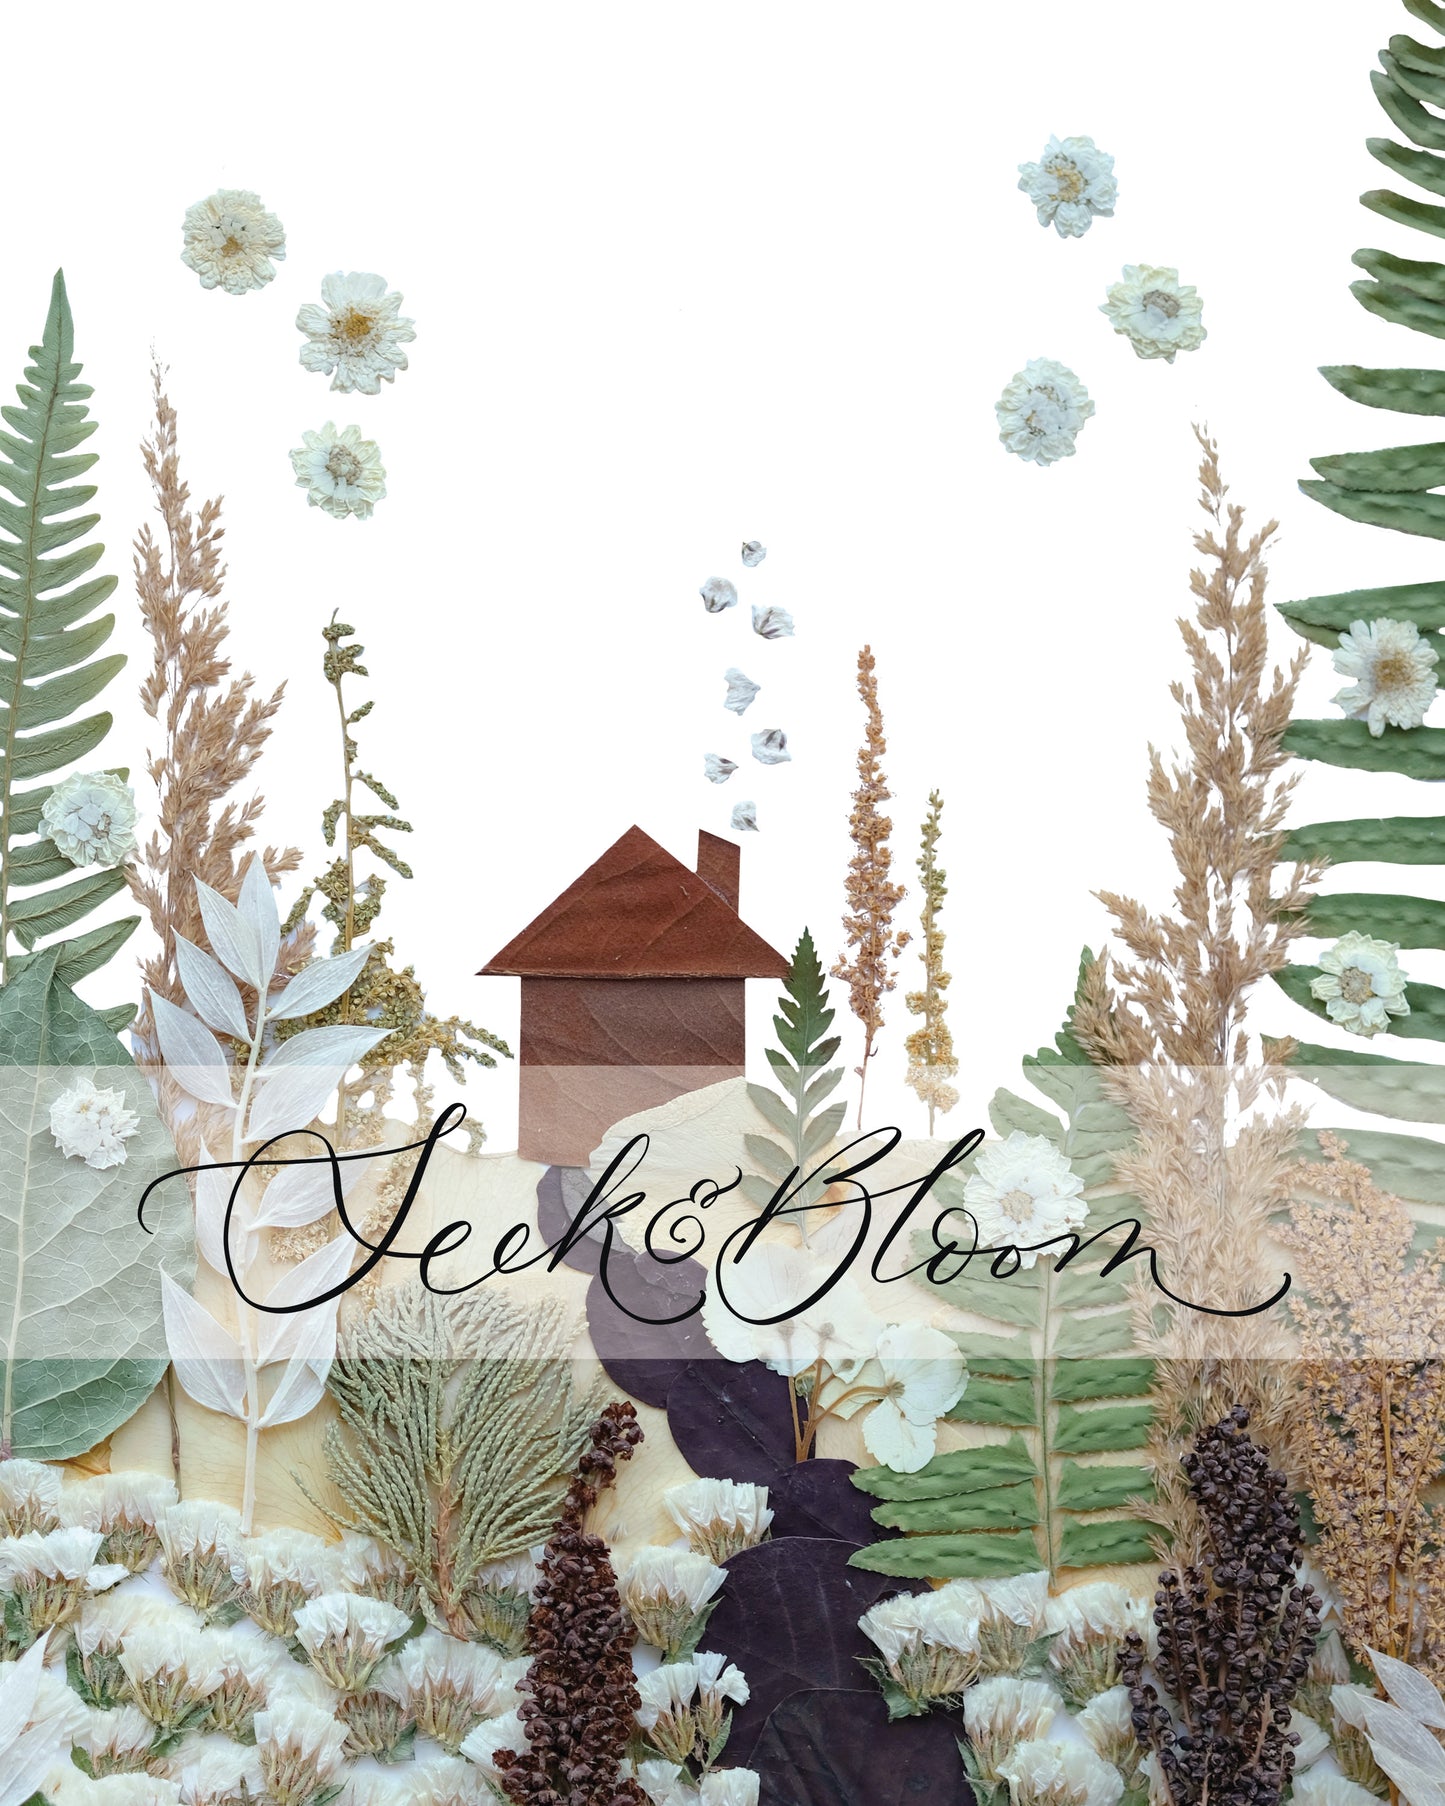 cozy winter nature scene with cabin made with flowers and leaves.